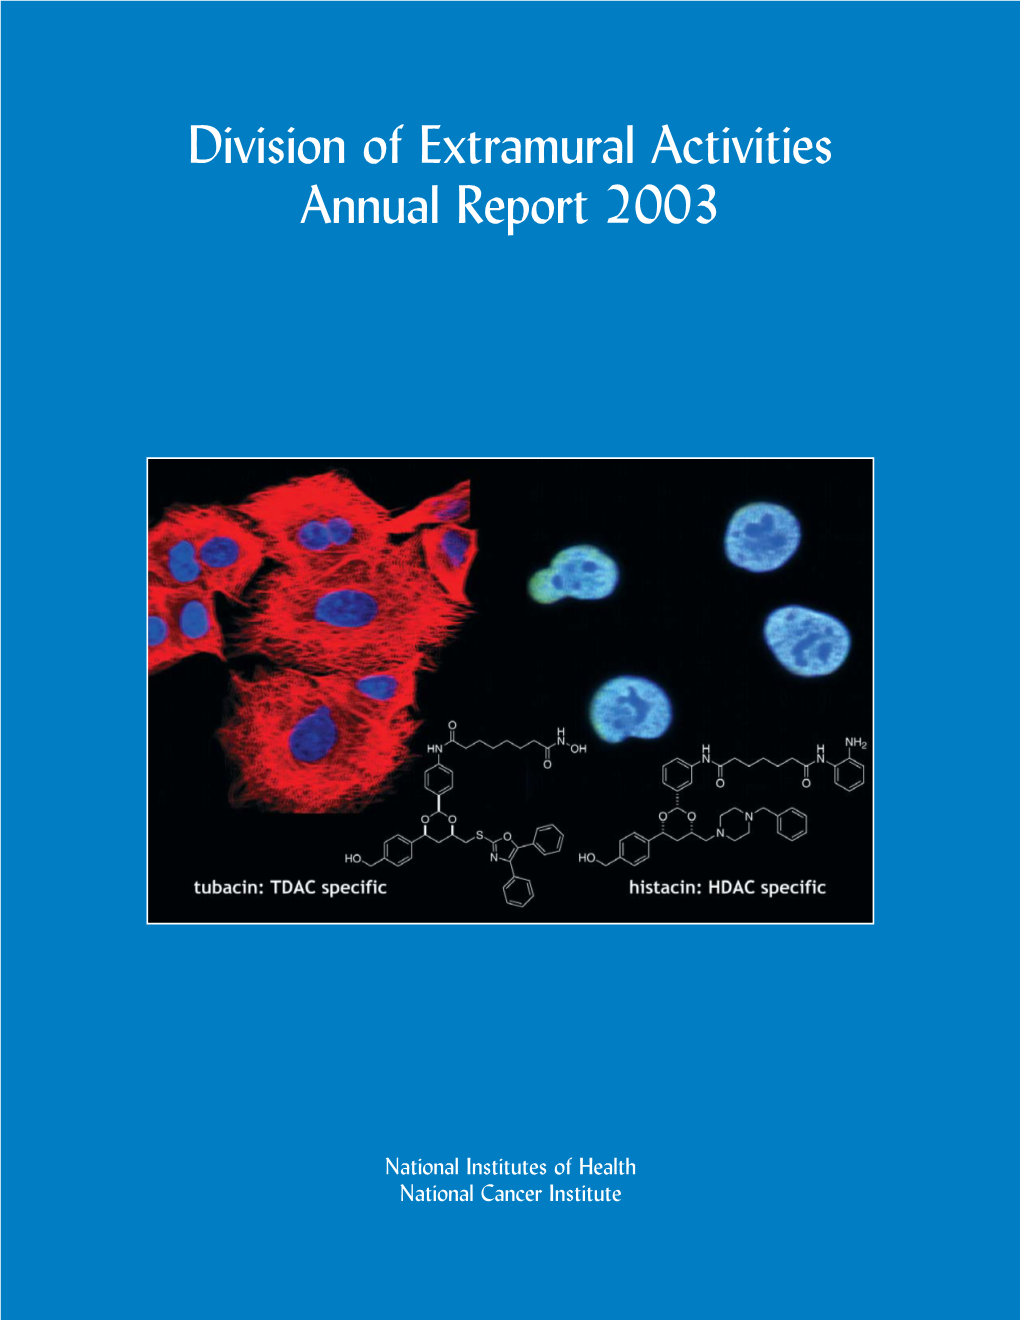 Division of Extramural Activities Annual Report 2003